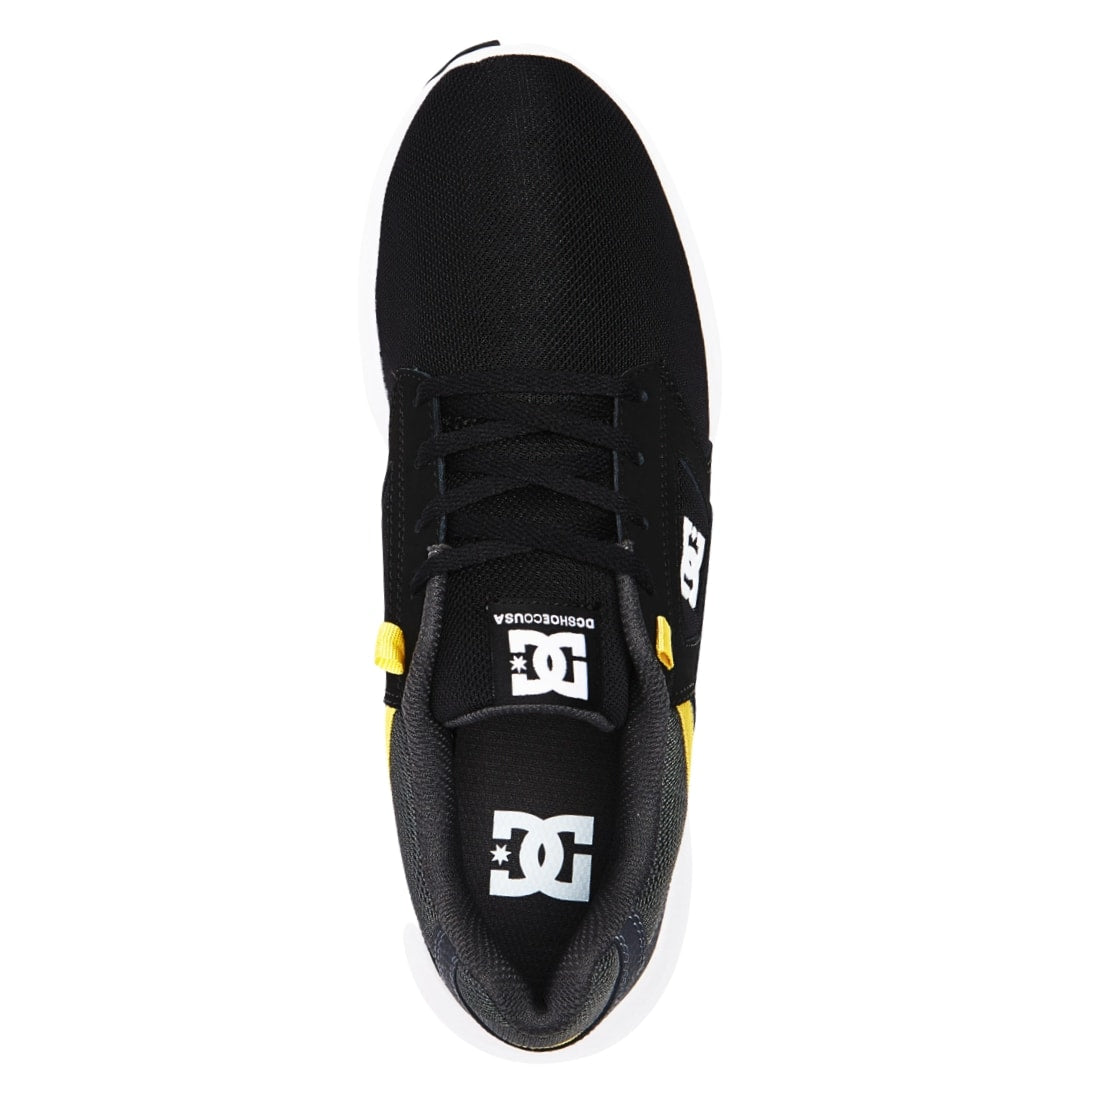 Dc Skyline Lightweight Shoes - Black/Grey/Yellow - Mens Running Shoes/Trainers by DC